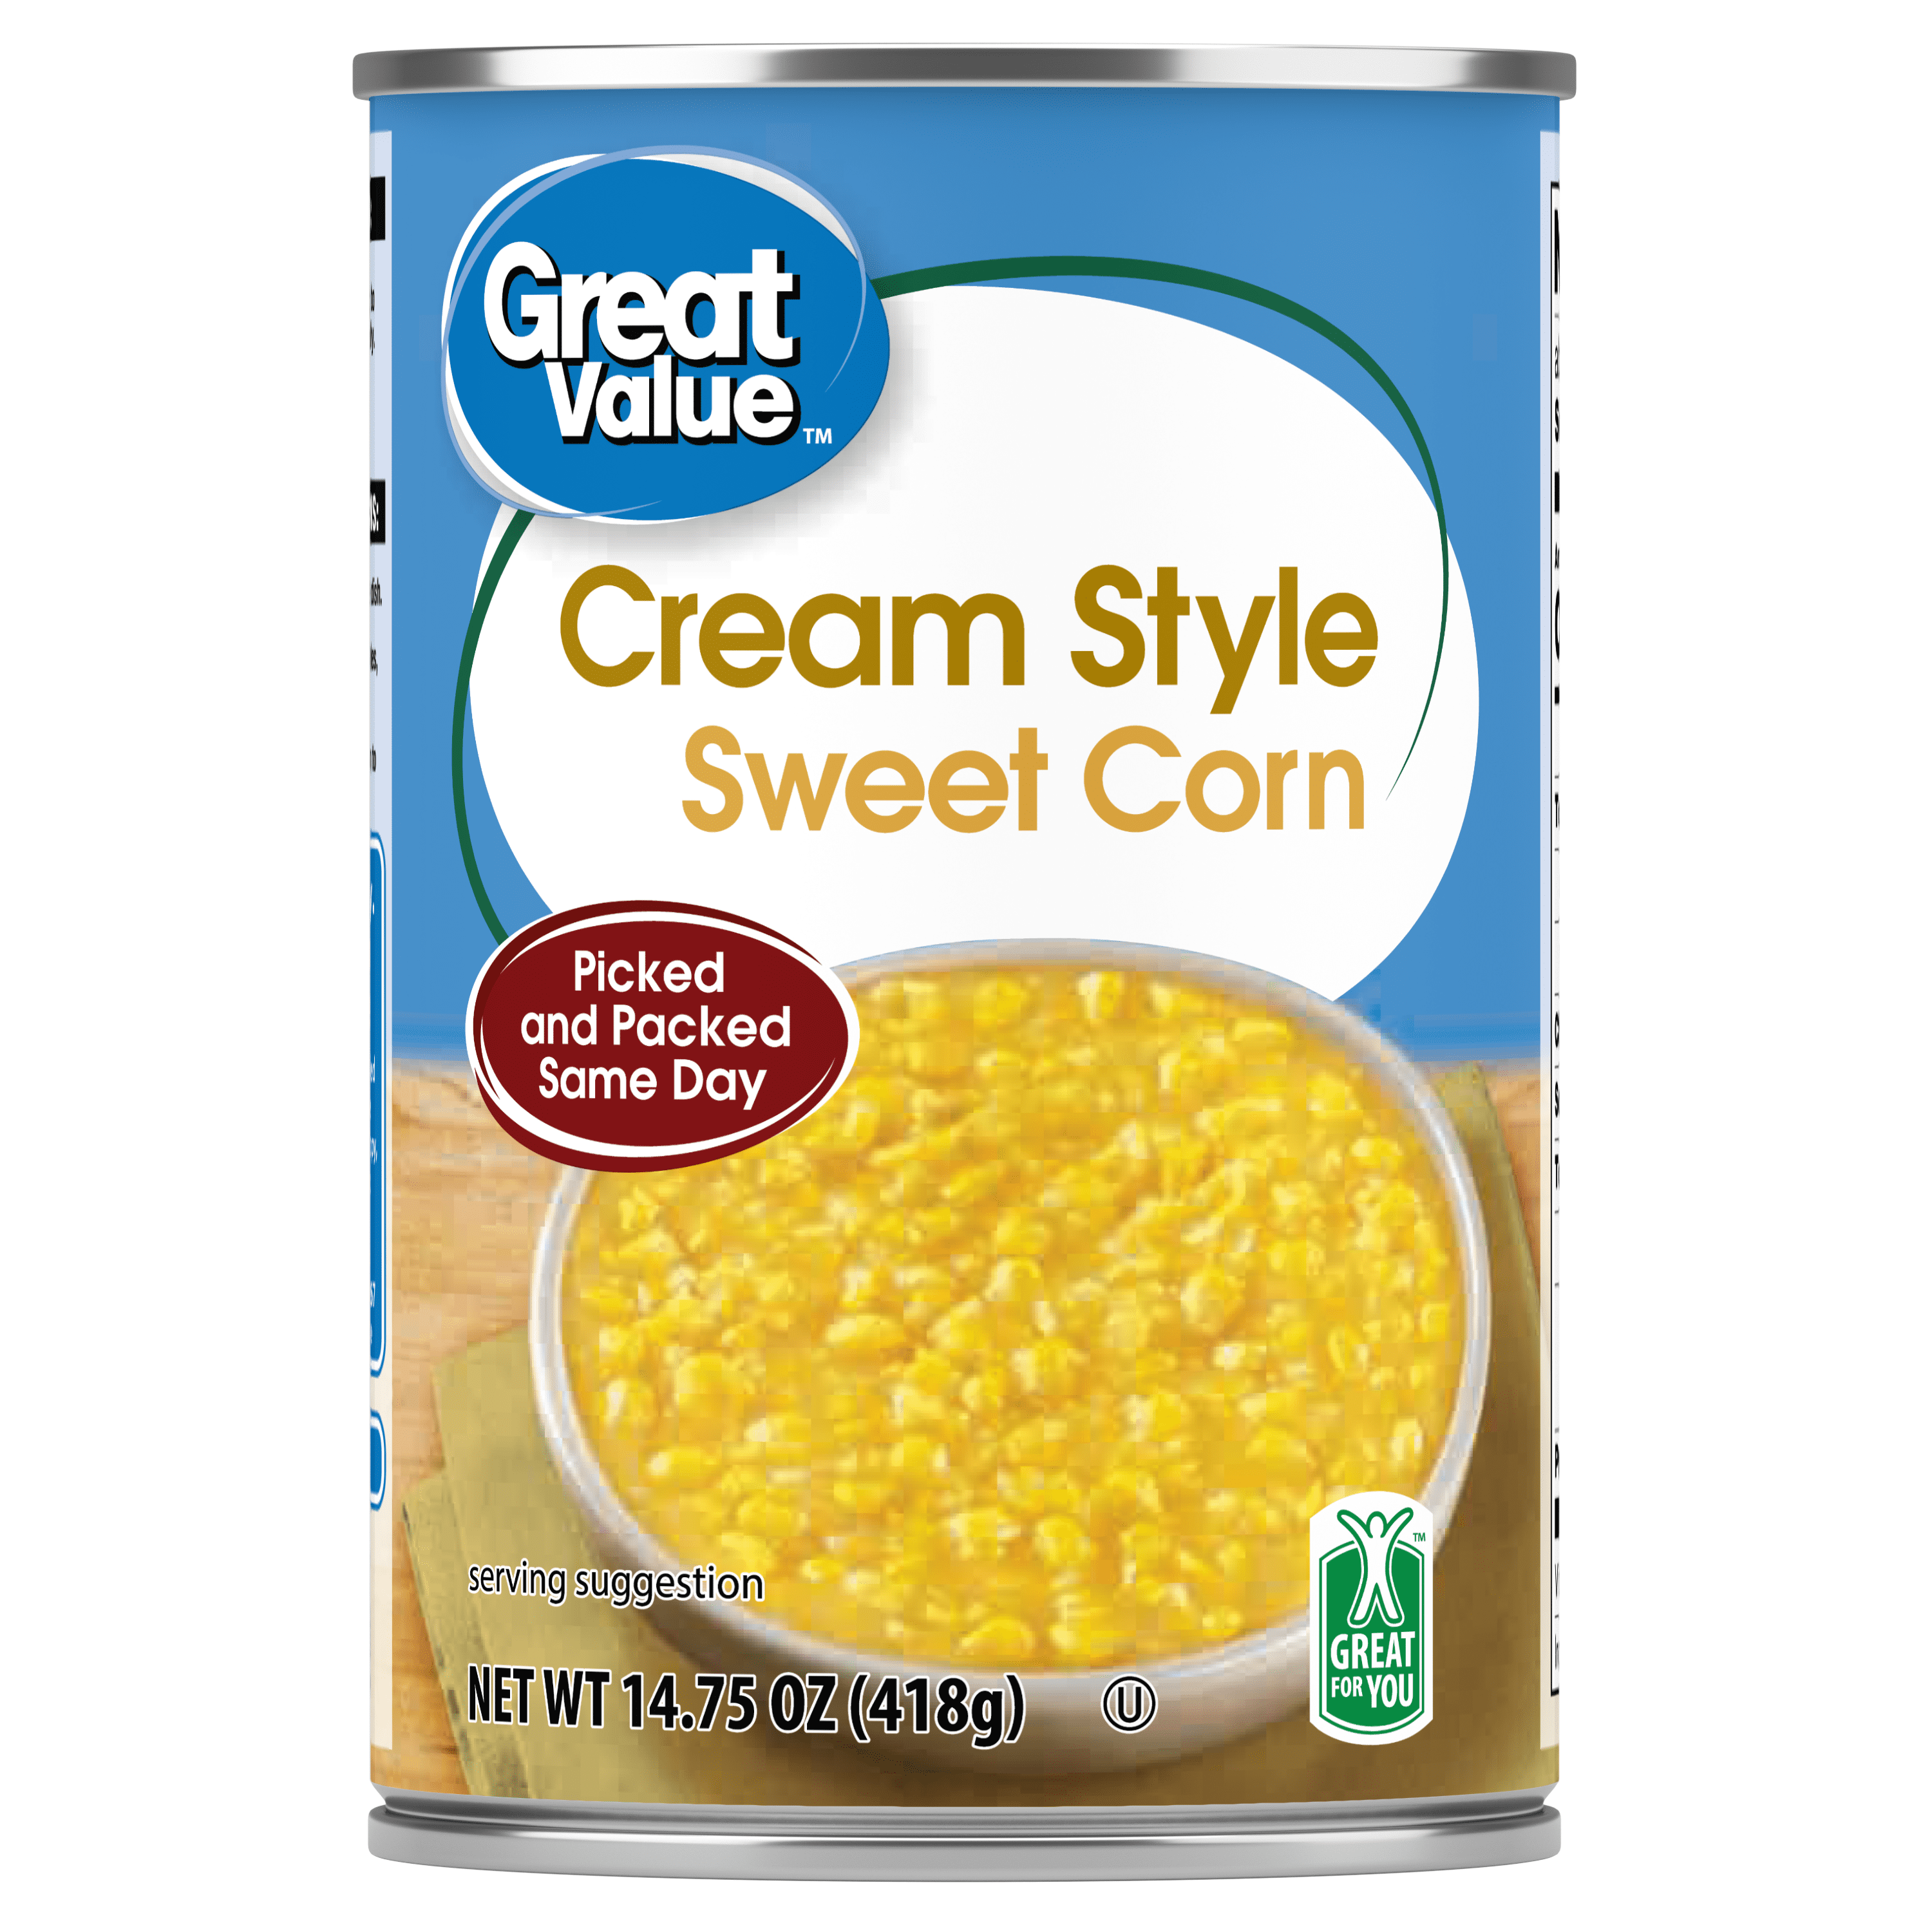 Great Value Canned Cream Style Sweet Corn, 14.75 oz Aluminum Can